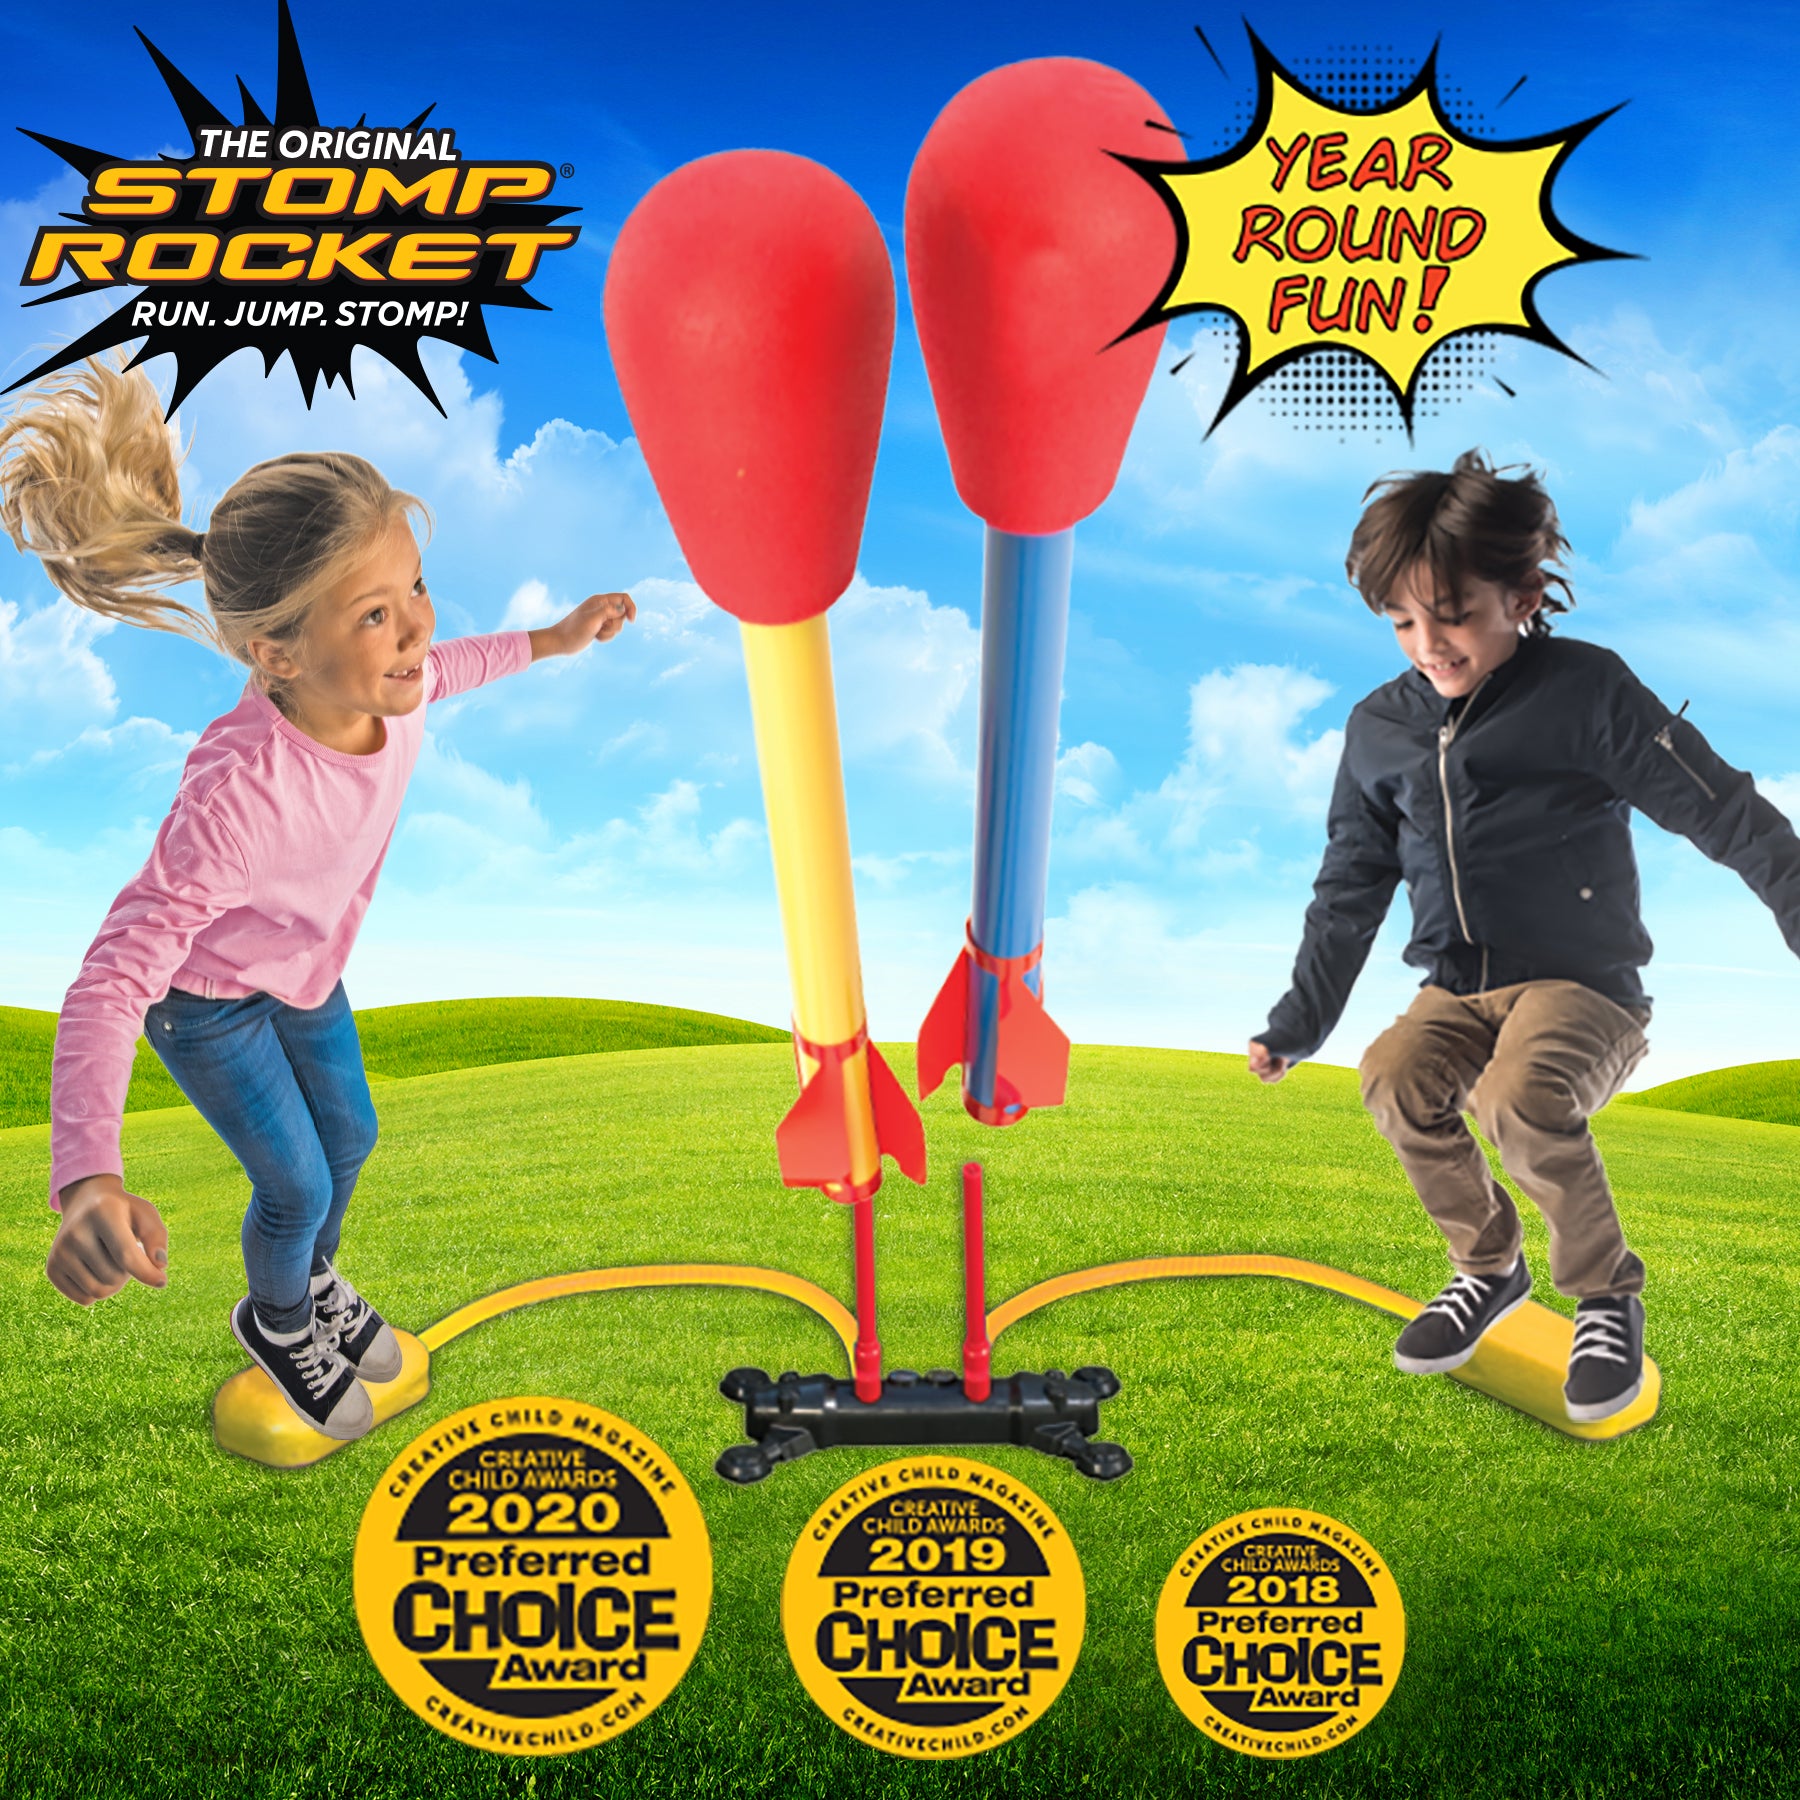 Dueling Stomp Rockets